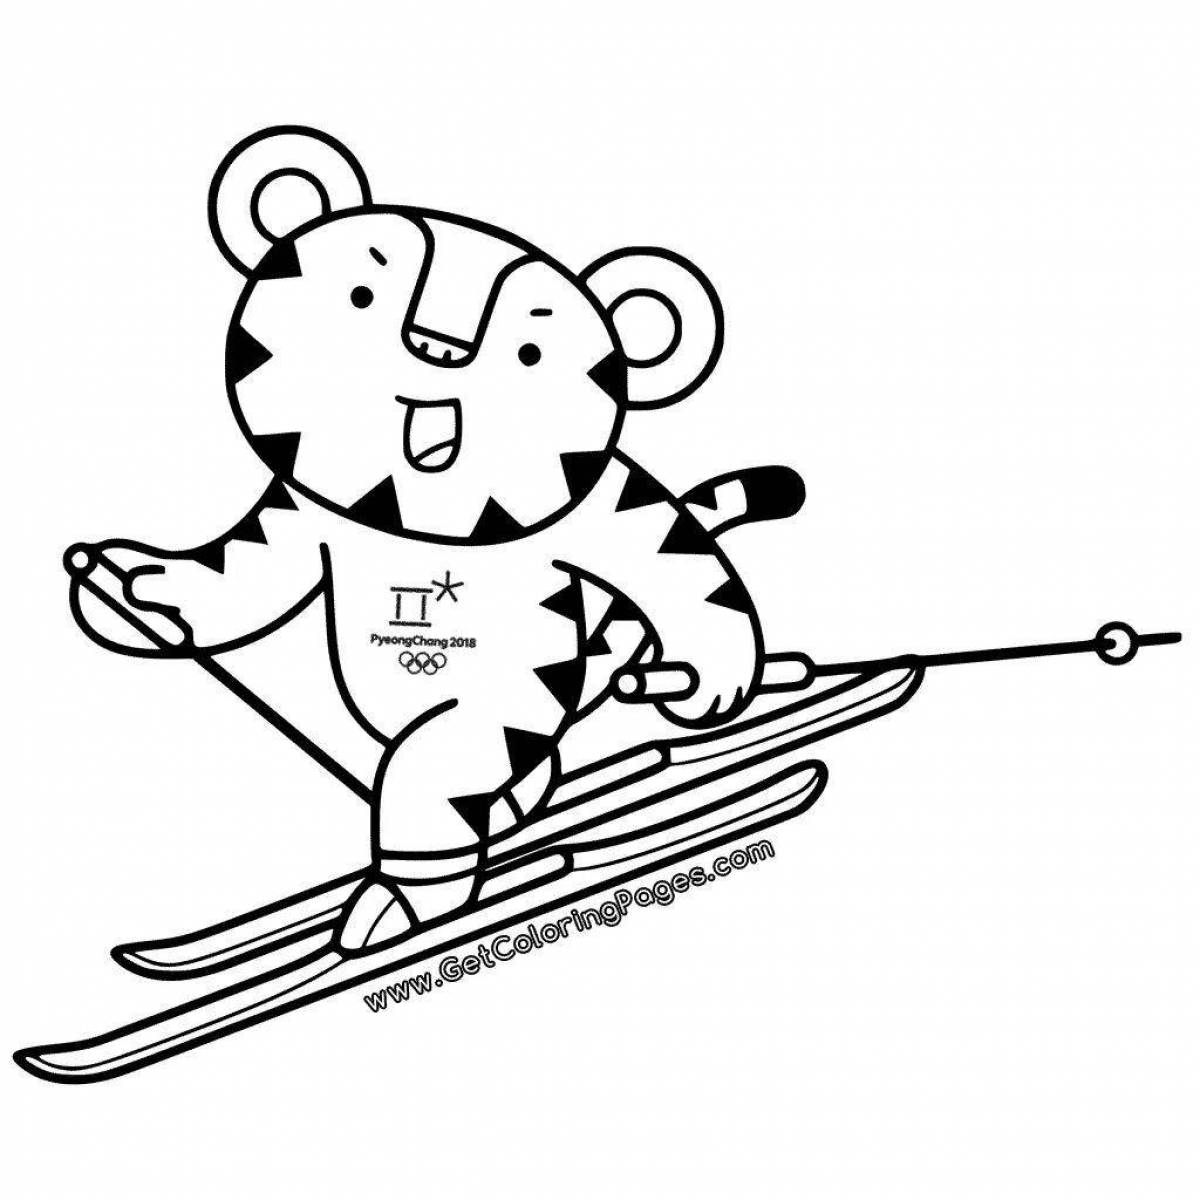 Colorful ski race coloring page